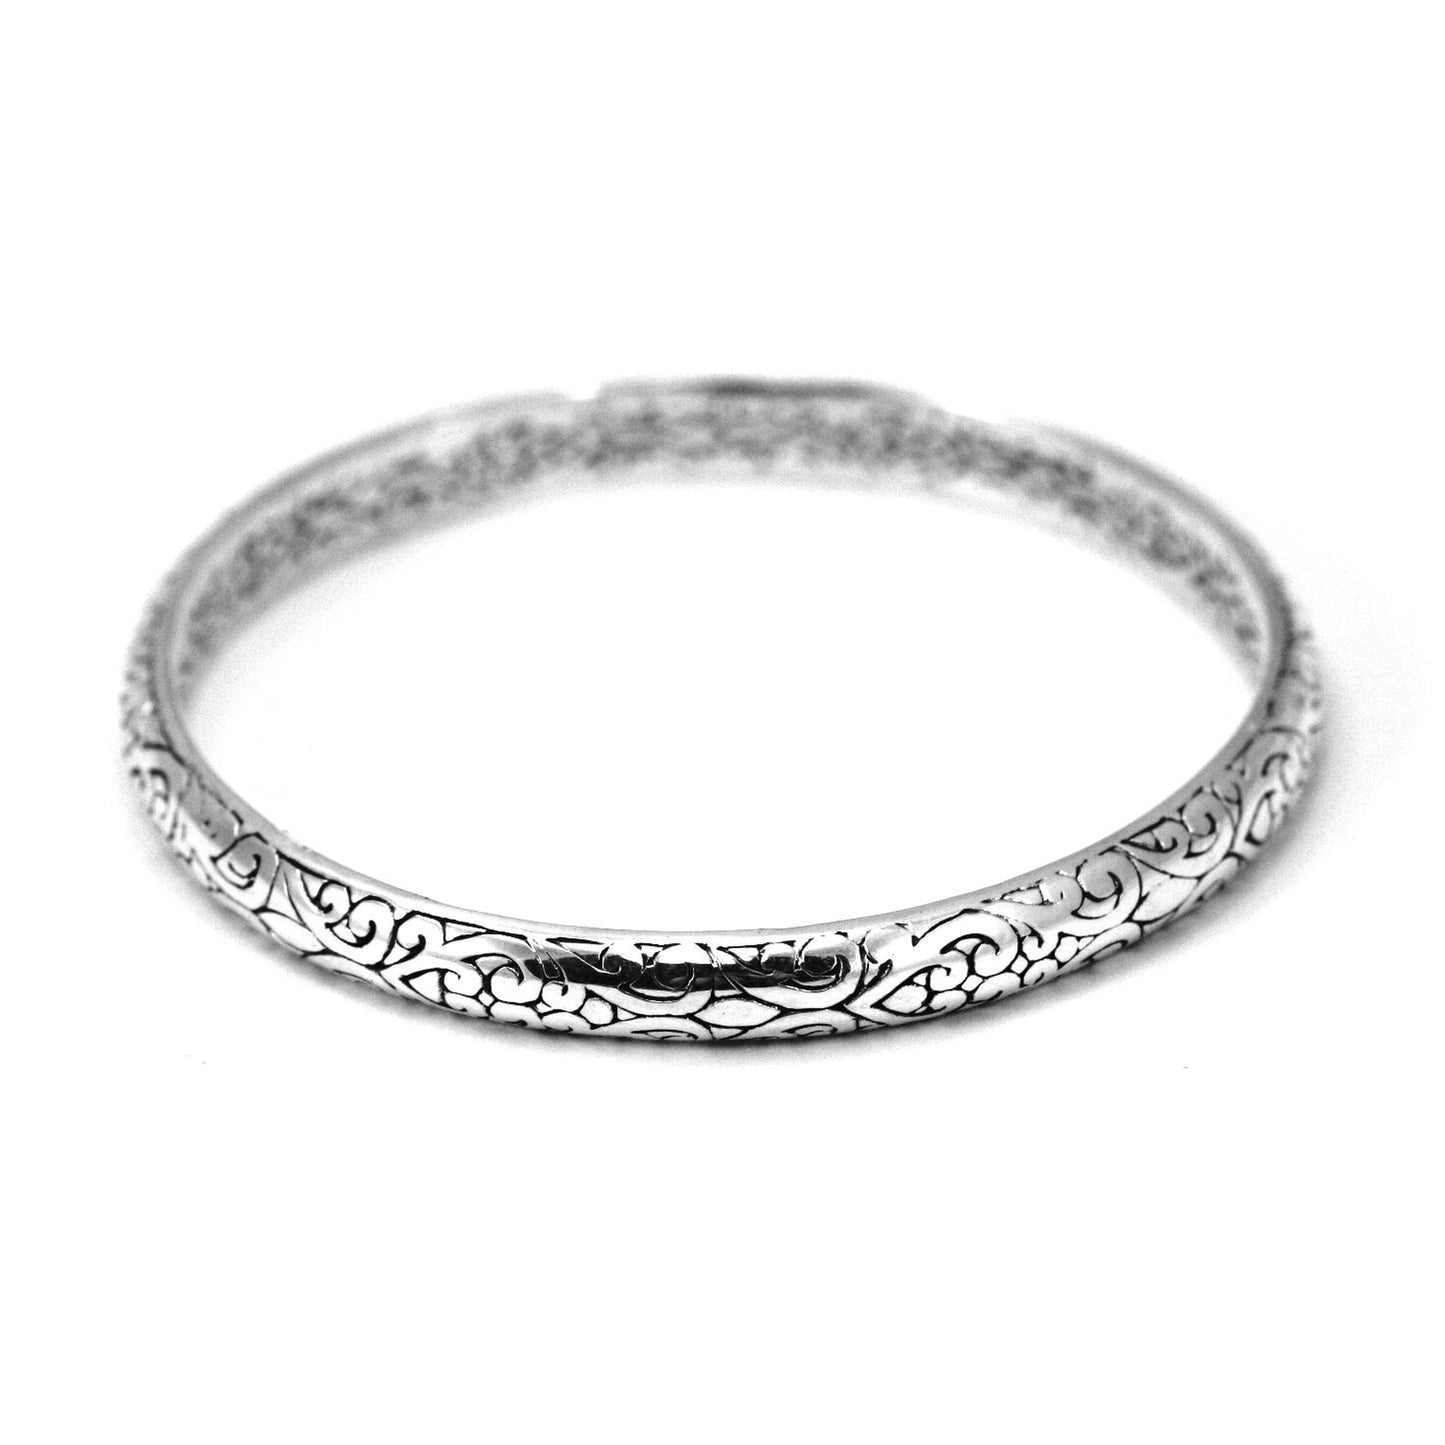 Thick and chunky silver bangle bracelet with carved filigree design detail.